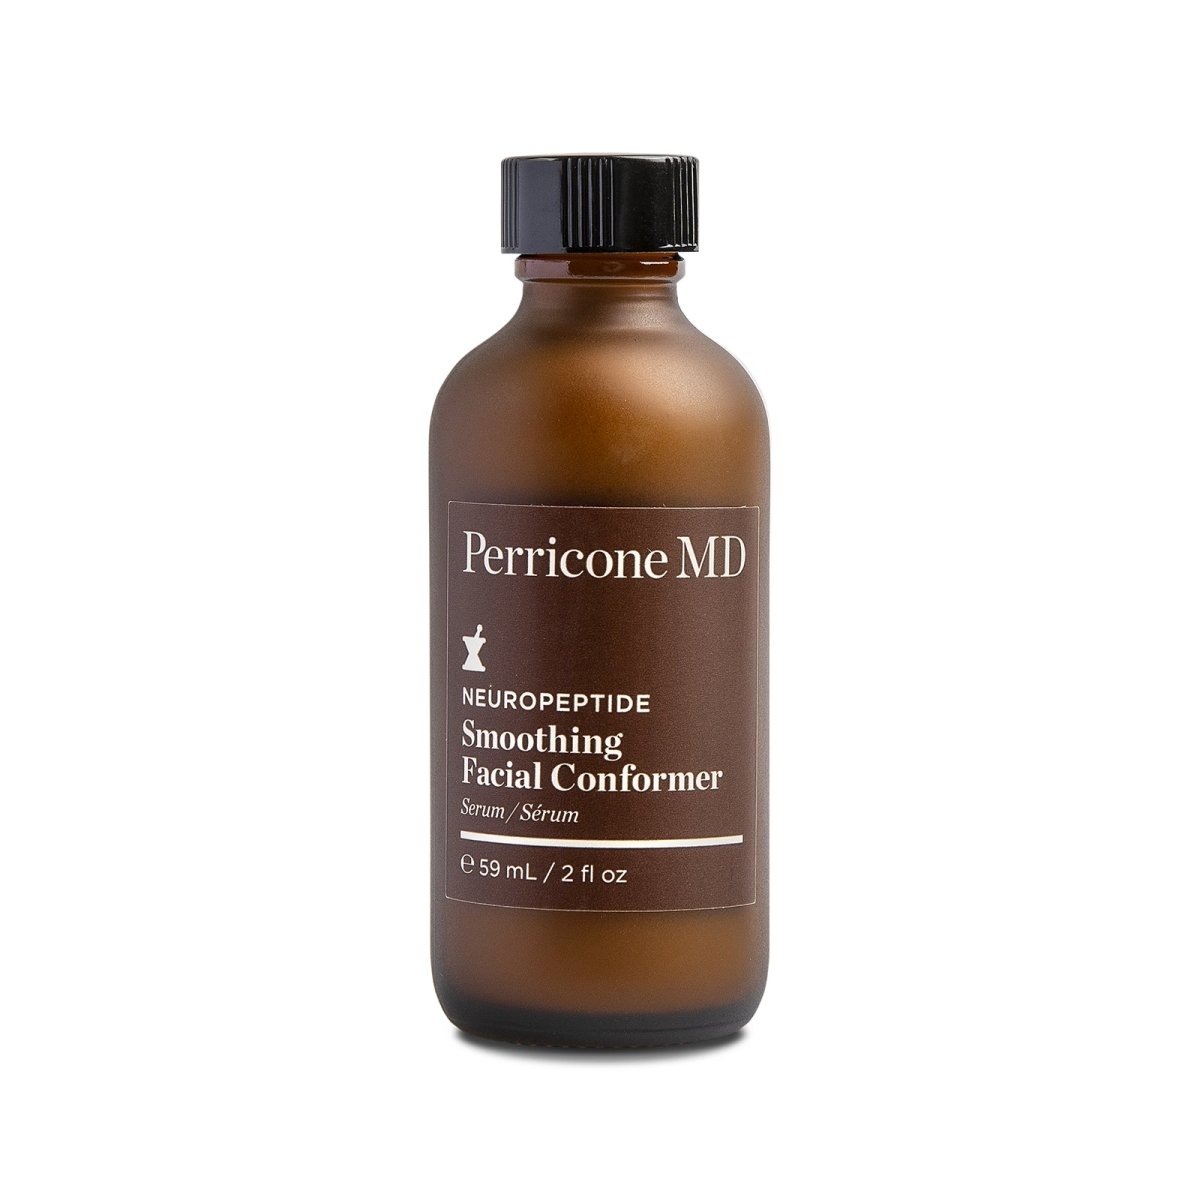 Perricone MD Neuropeptide Smoothing Facial Conformer - SkincareEssentials